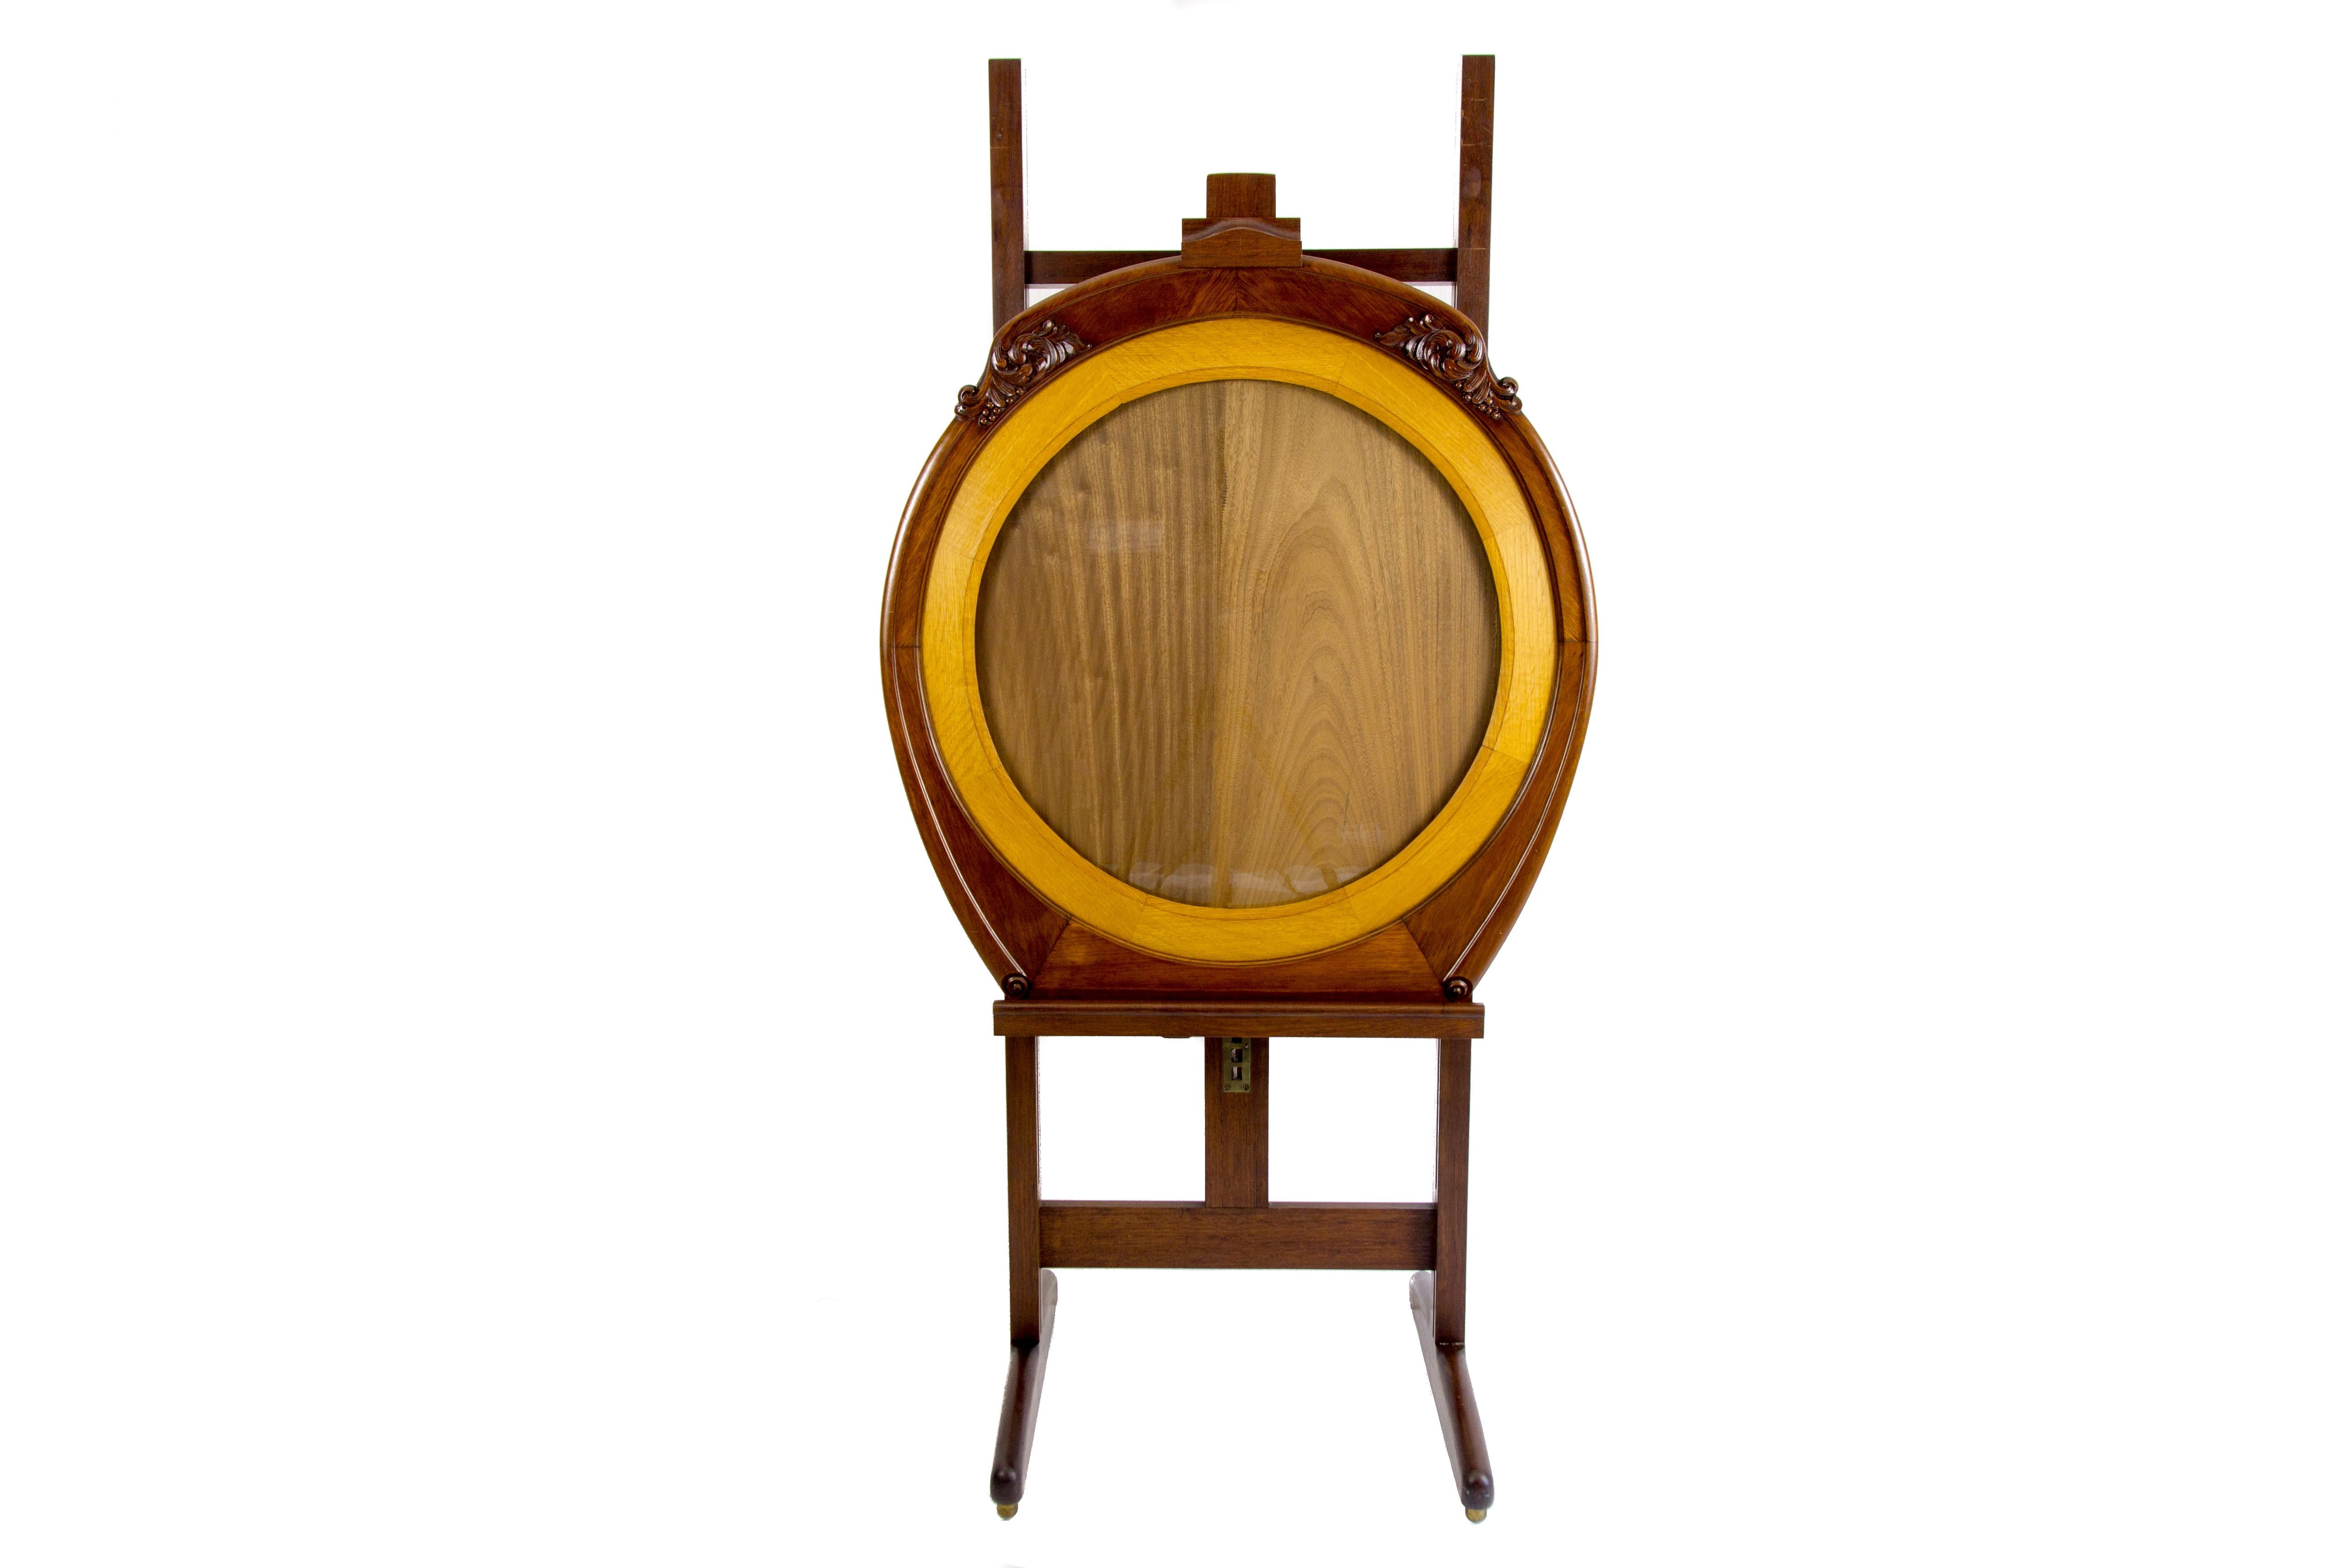 Rare Art Deco easel or painting stand from the 1920s, made of walnut and oakwood, comes together with the round frame with glass. The frame is decorated with floral carvings. Adjustable in height, this beautiful easel stands on four rollers. Can be